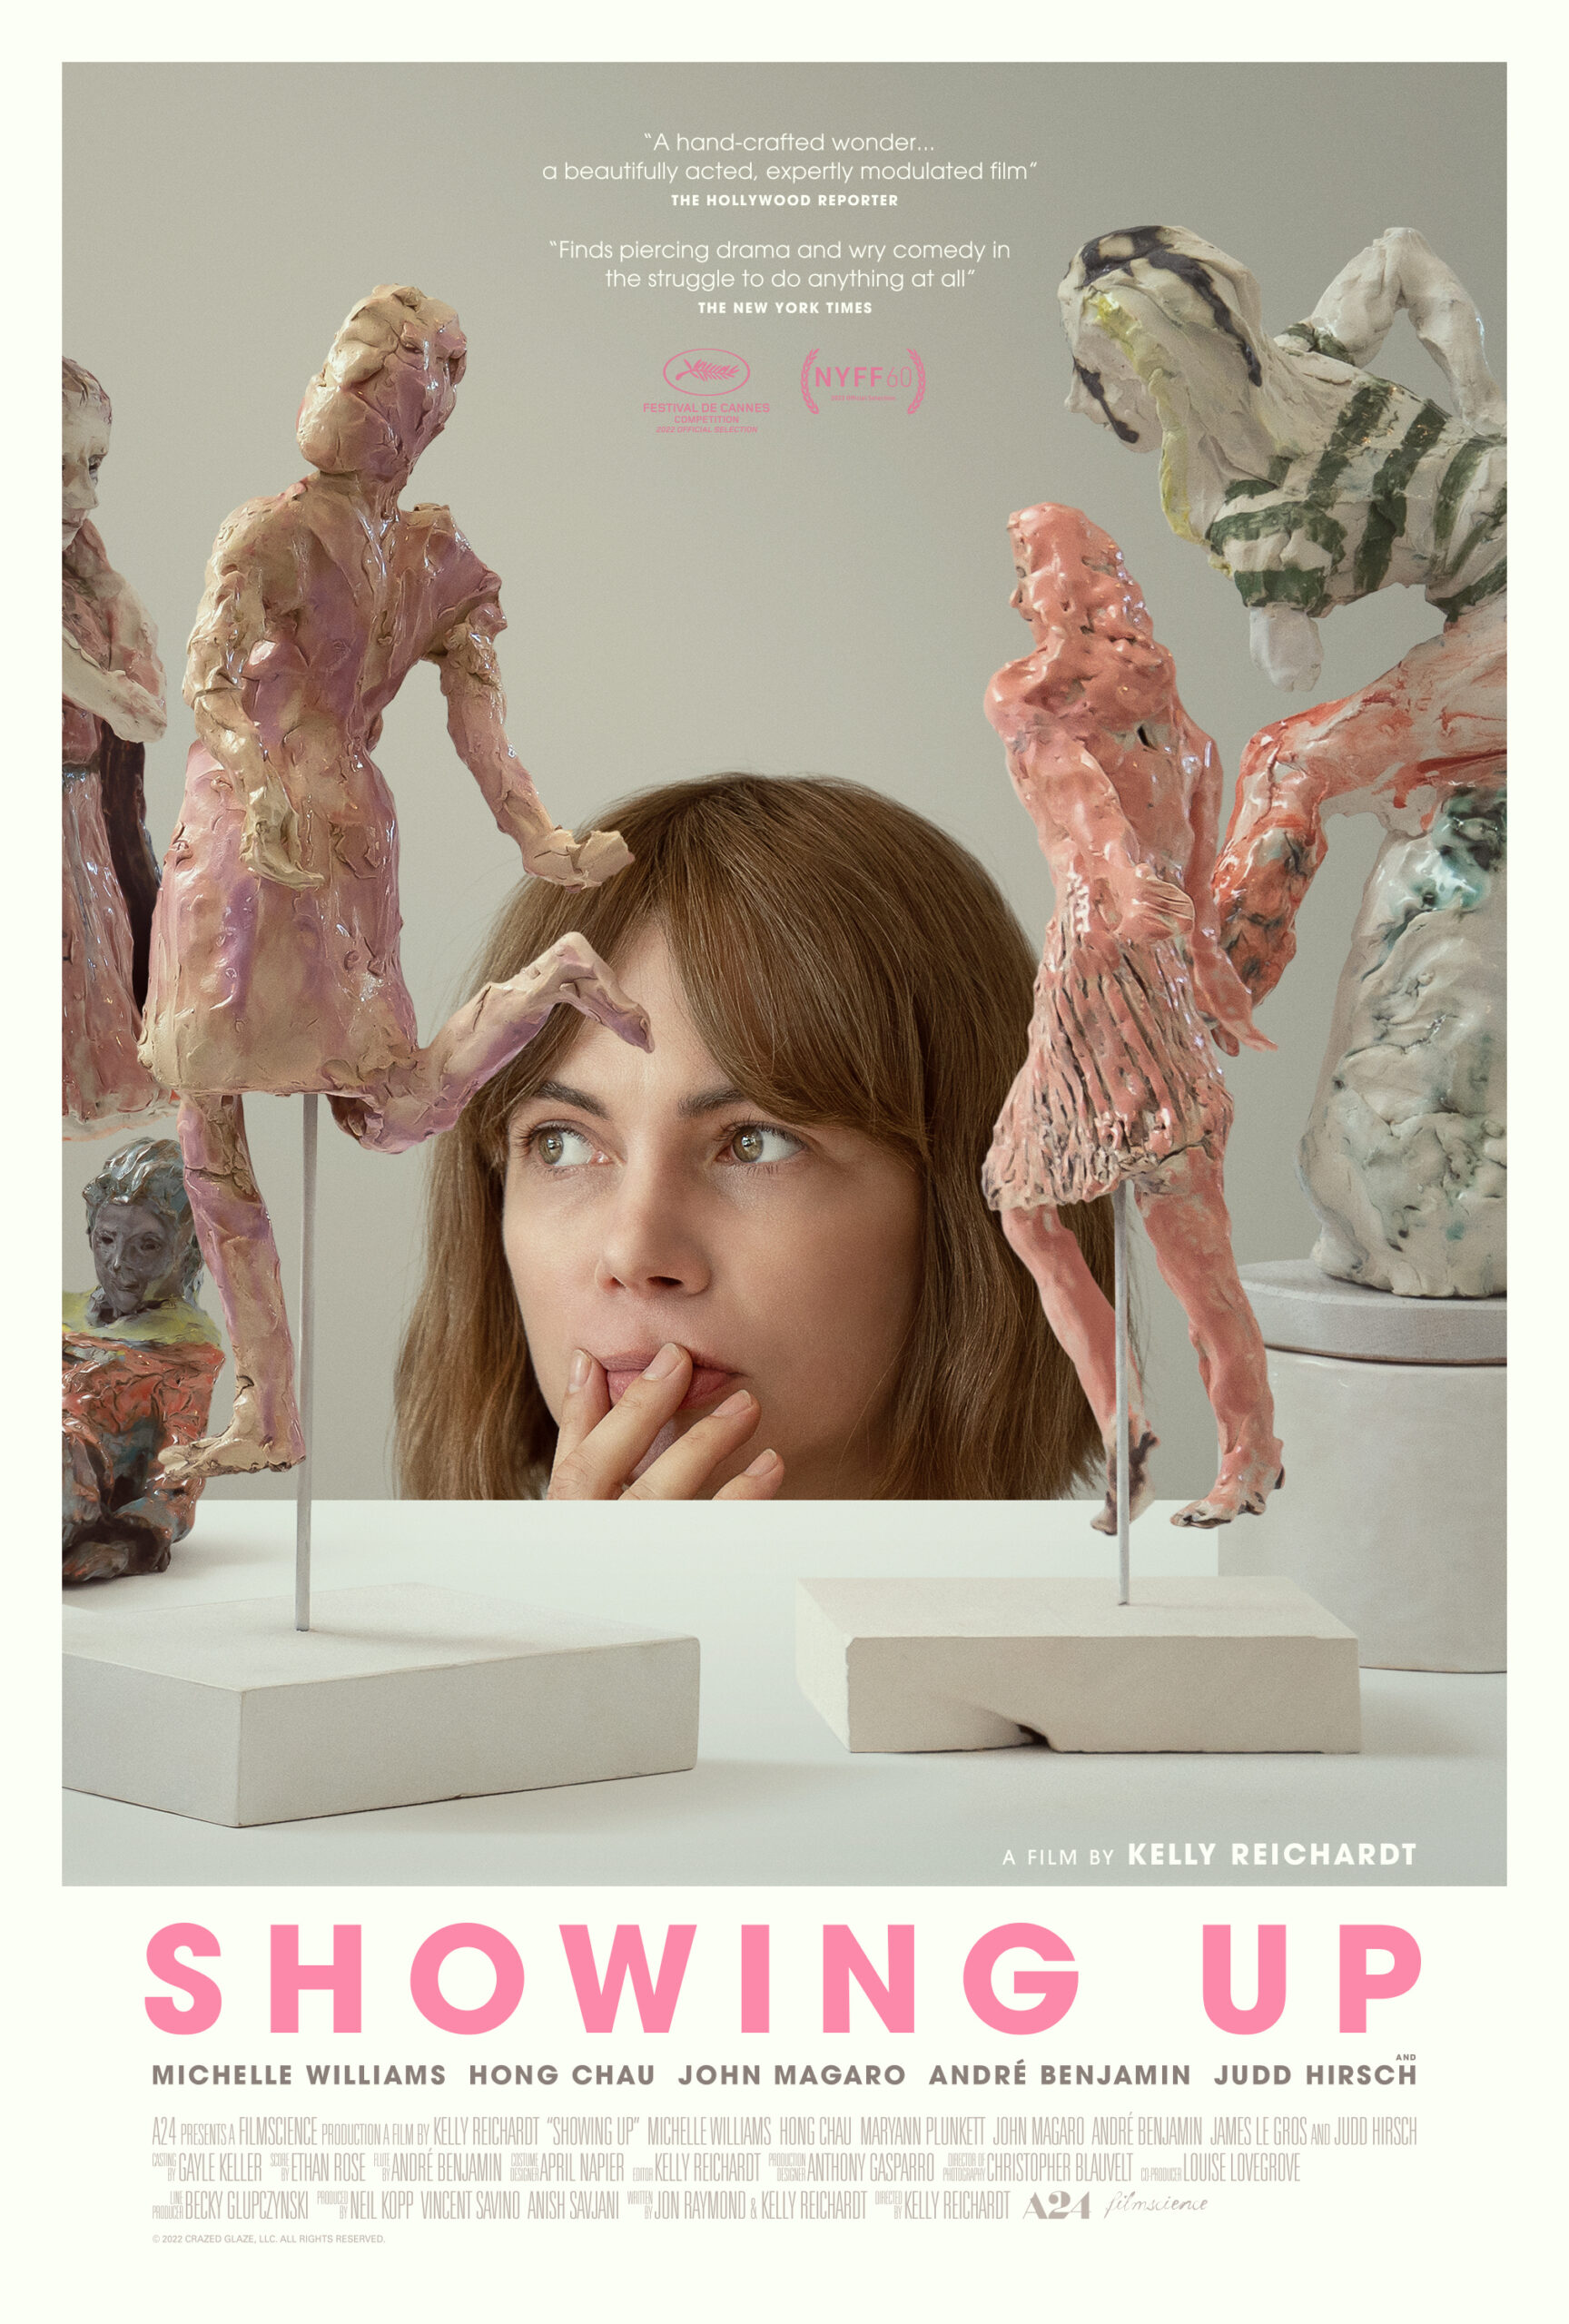 Cover of Showing Up [White, brunette woman behind two small, anthropomorphic sculptures].